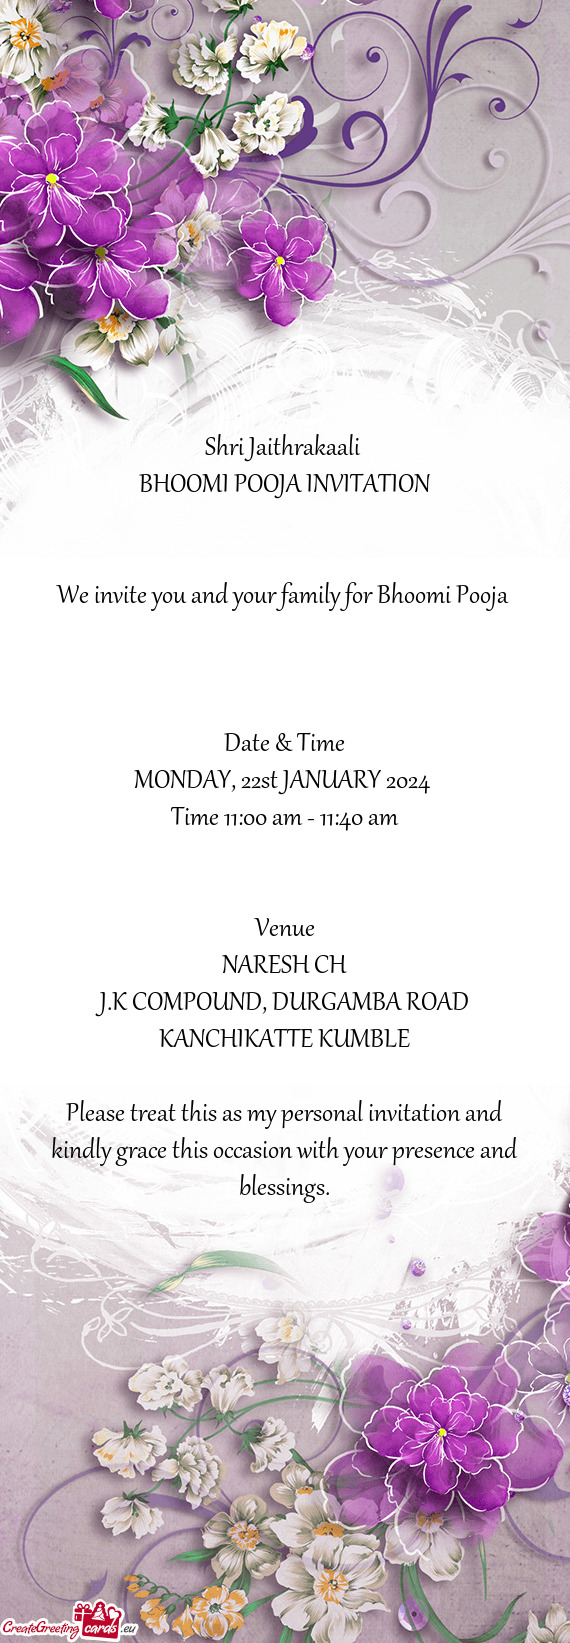 We invite you and your family for Bhoomi Pooja